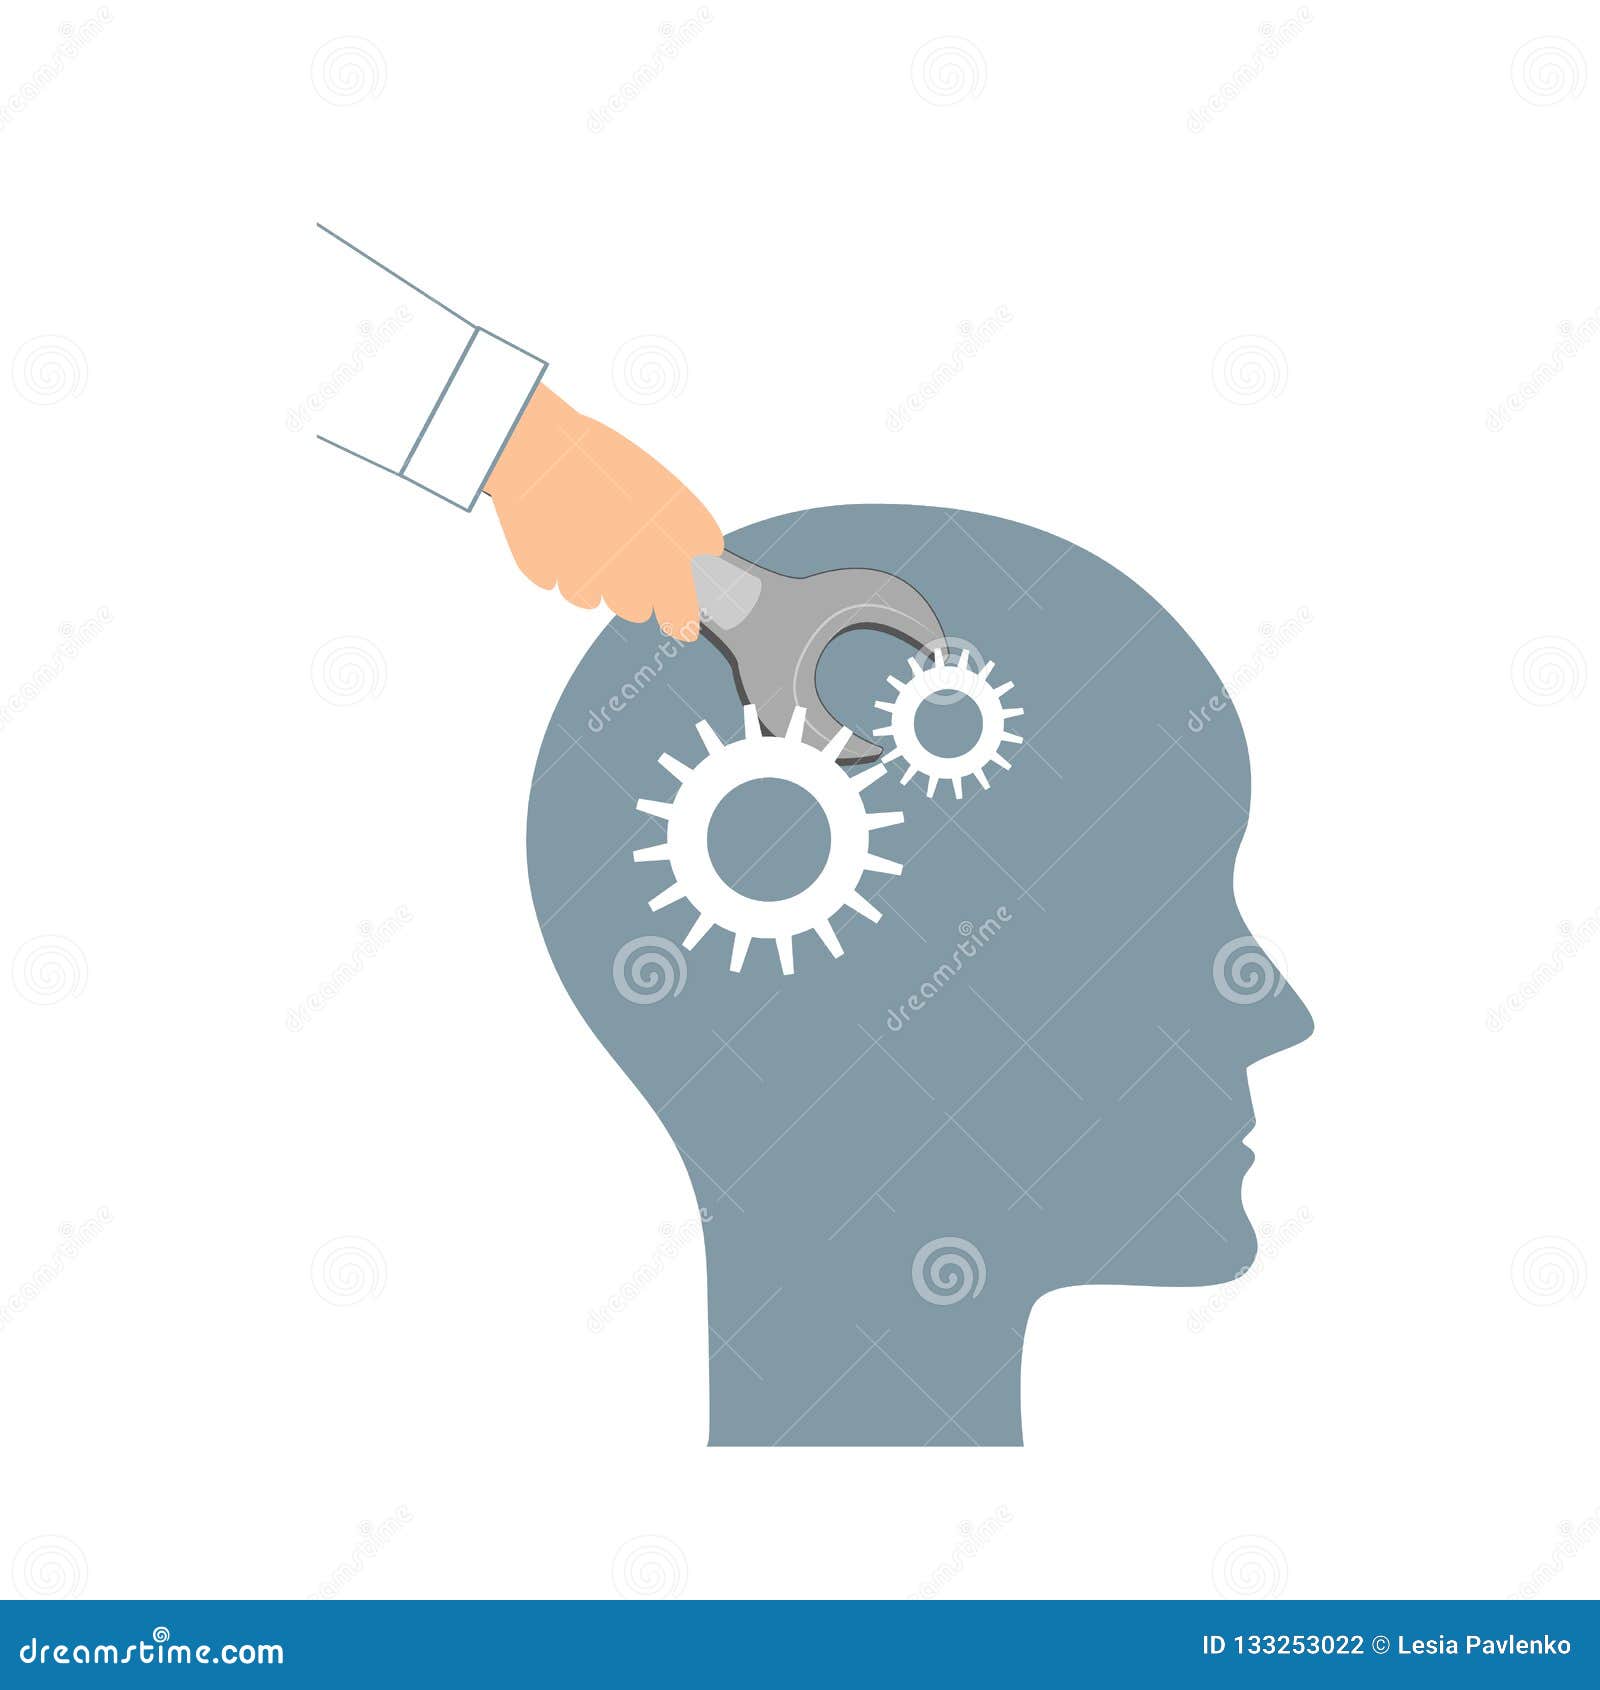 nlp or neuro-linguistic programming concept. open human head and a hand with a wrench. manipulation, mental health